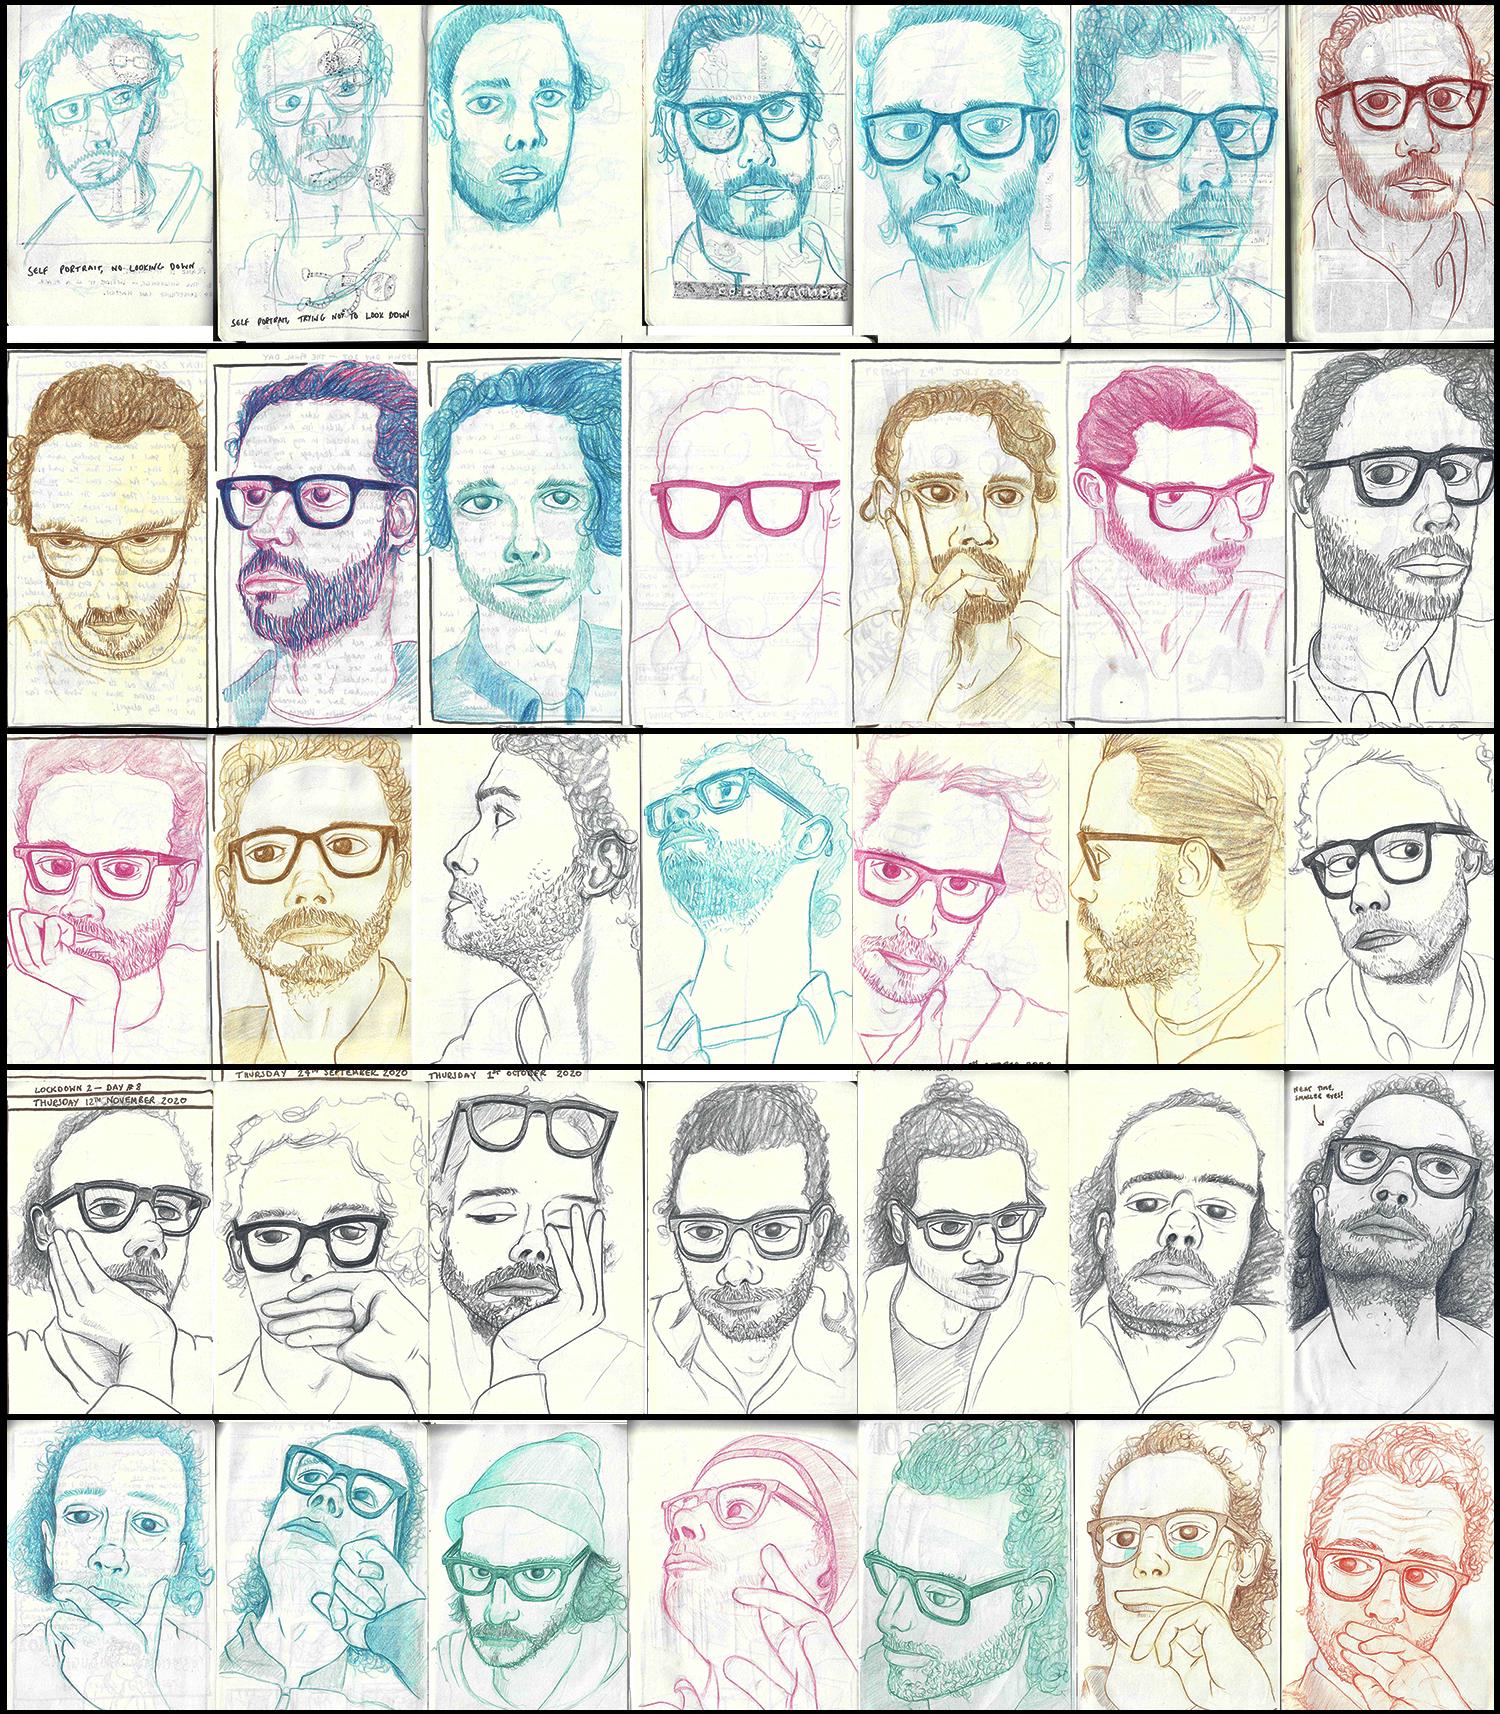 A full grid of 25 self portaits by Adam Westbrook